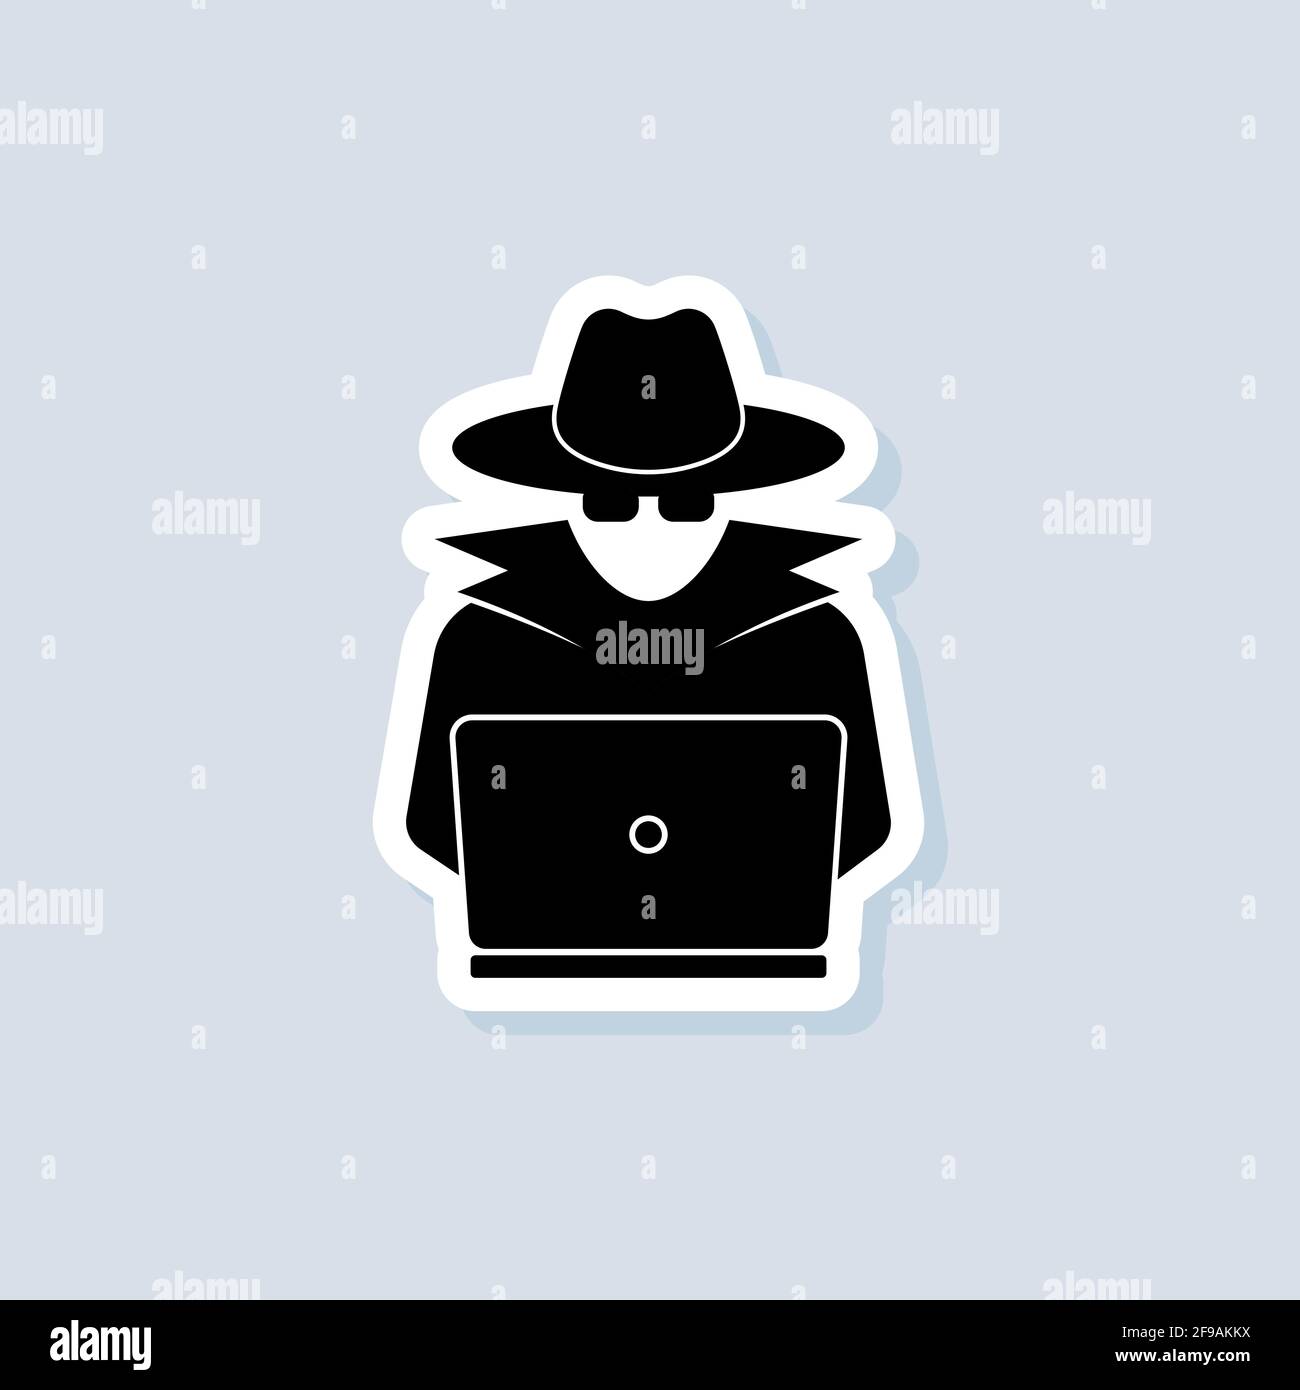 Incognito sticker. Incognito logo. Browse in private. Spy agent, secret agent, hacker. Vector on isolated background. EPS 10. Stock Vector